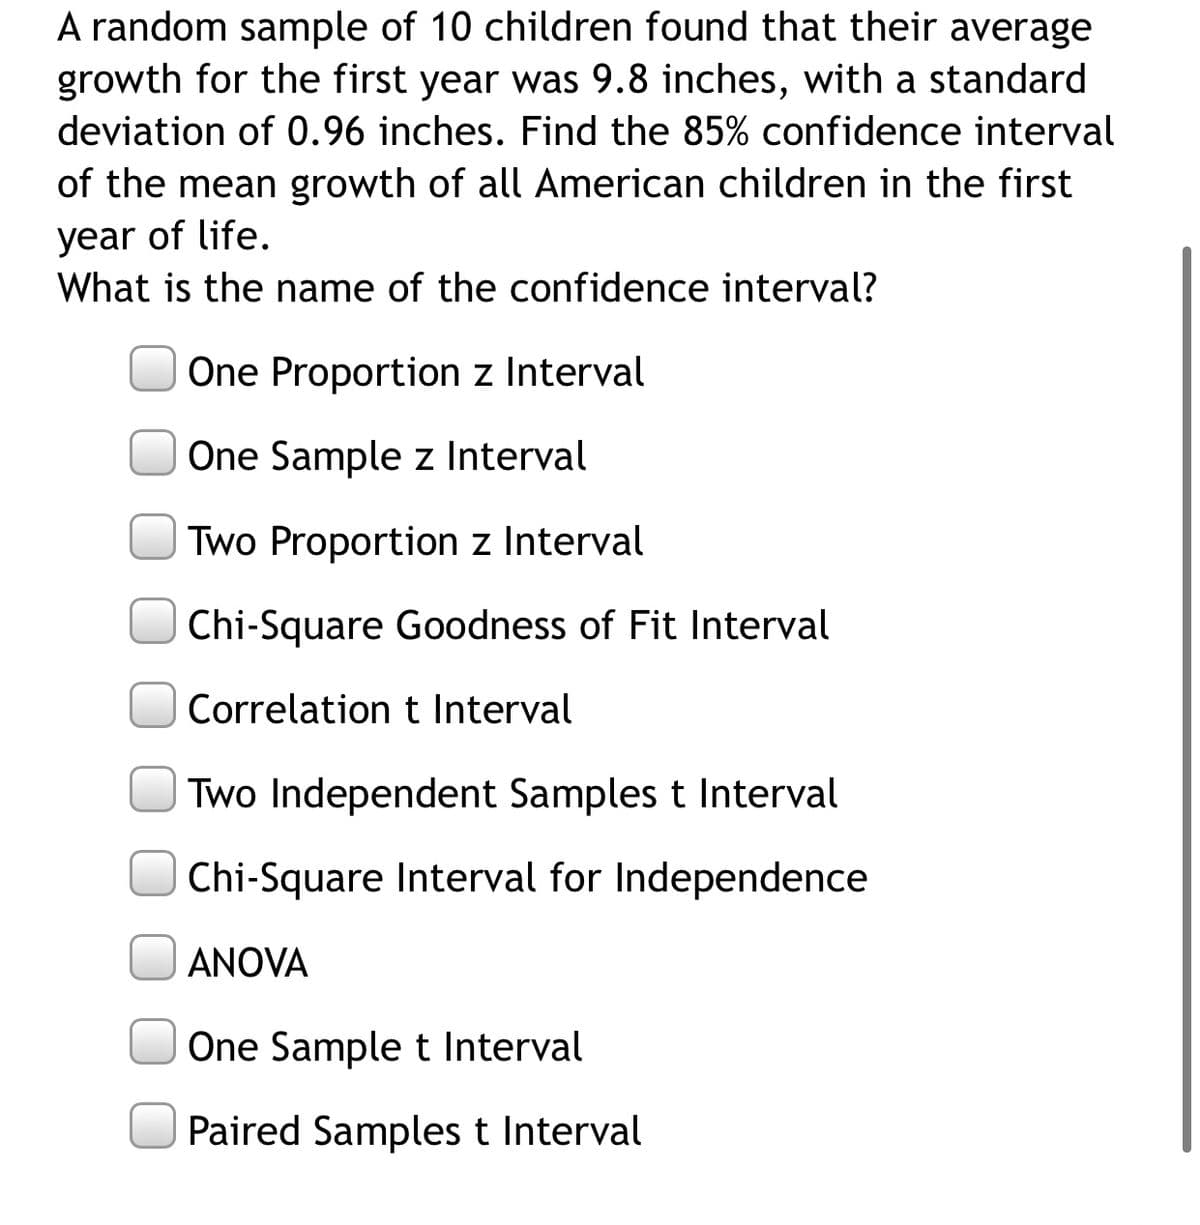 A random sample of 10 children found that their average
growth for the first year was 9.8 inches, with a standard
deviation of 0.96 inches. Find the 85% confidence interval
of the mean growth of all American children in the first
year of life.
What is the name of the confidence interval?
One Proportion z Interval
One Sample z Interval
Two Proportion z Interval
Chi-Square Goodness of Fit Interval
Correlation t Interval
Two Independent Samples t Interval
Chi-Square Interval for Independence
ANOVA
One Sample t Interval
Paired Samples t Interval
